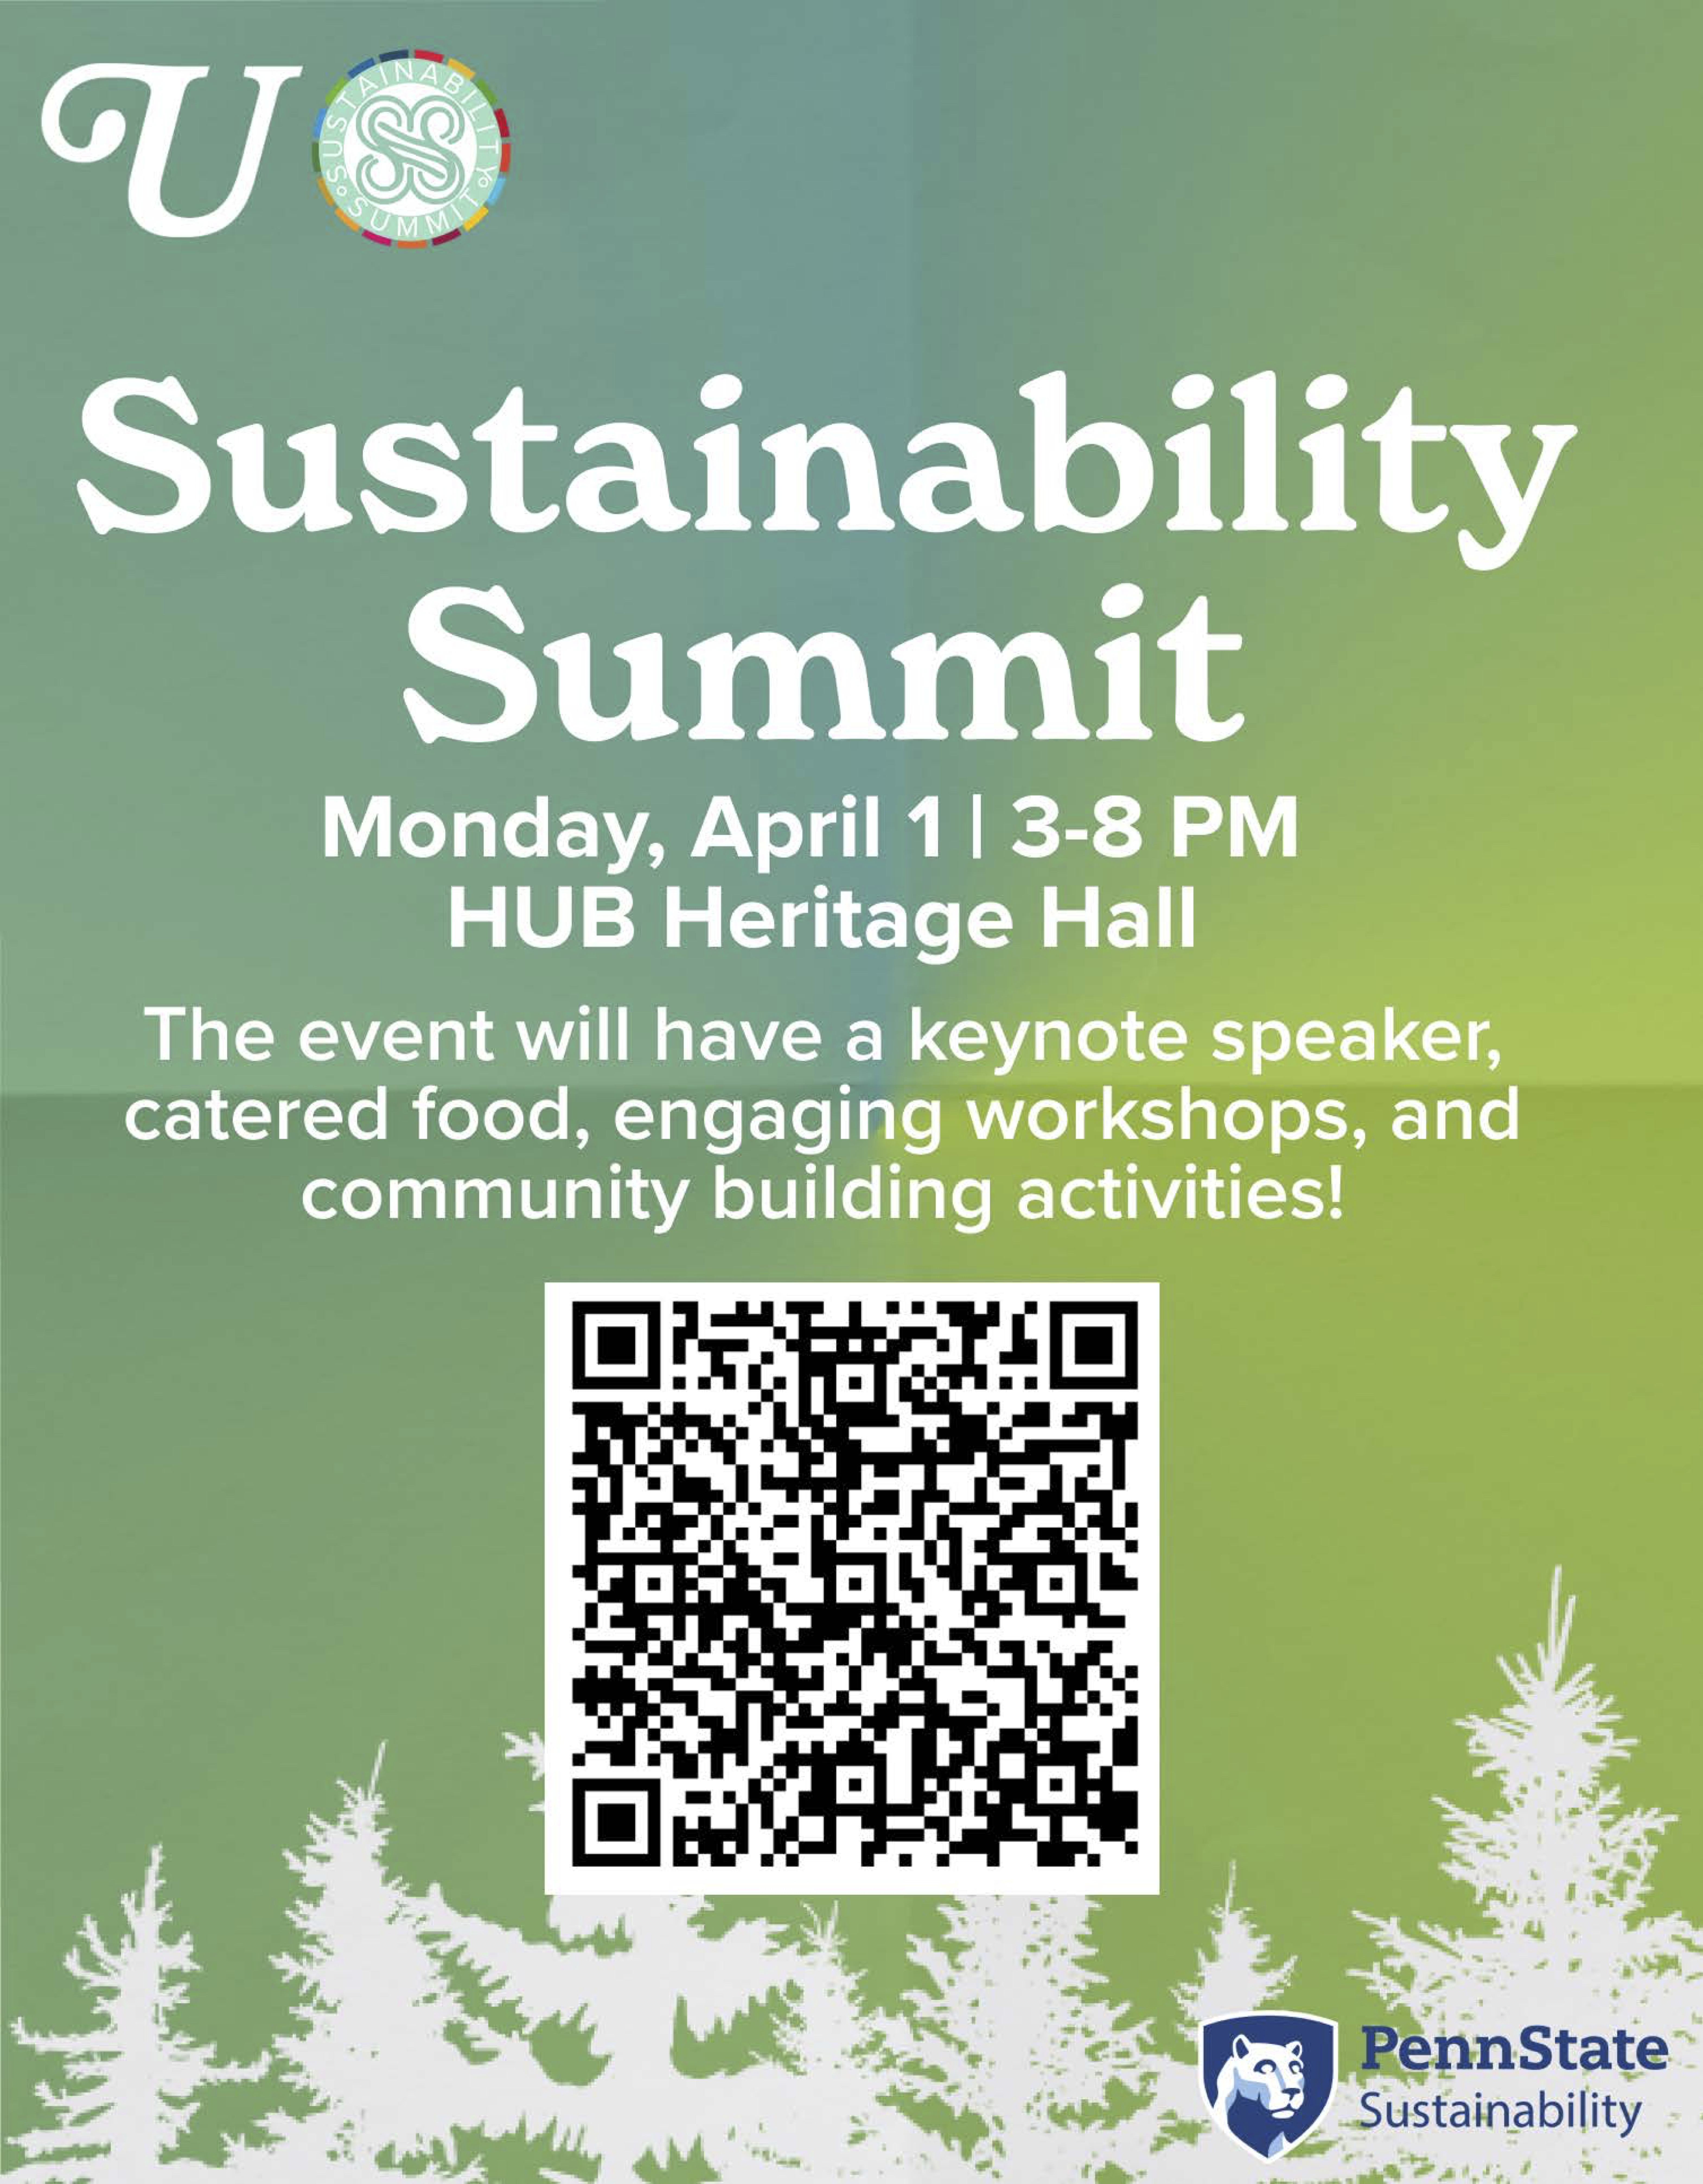 Flyer for Sustainability Summit